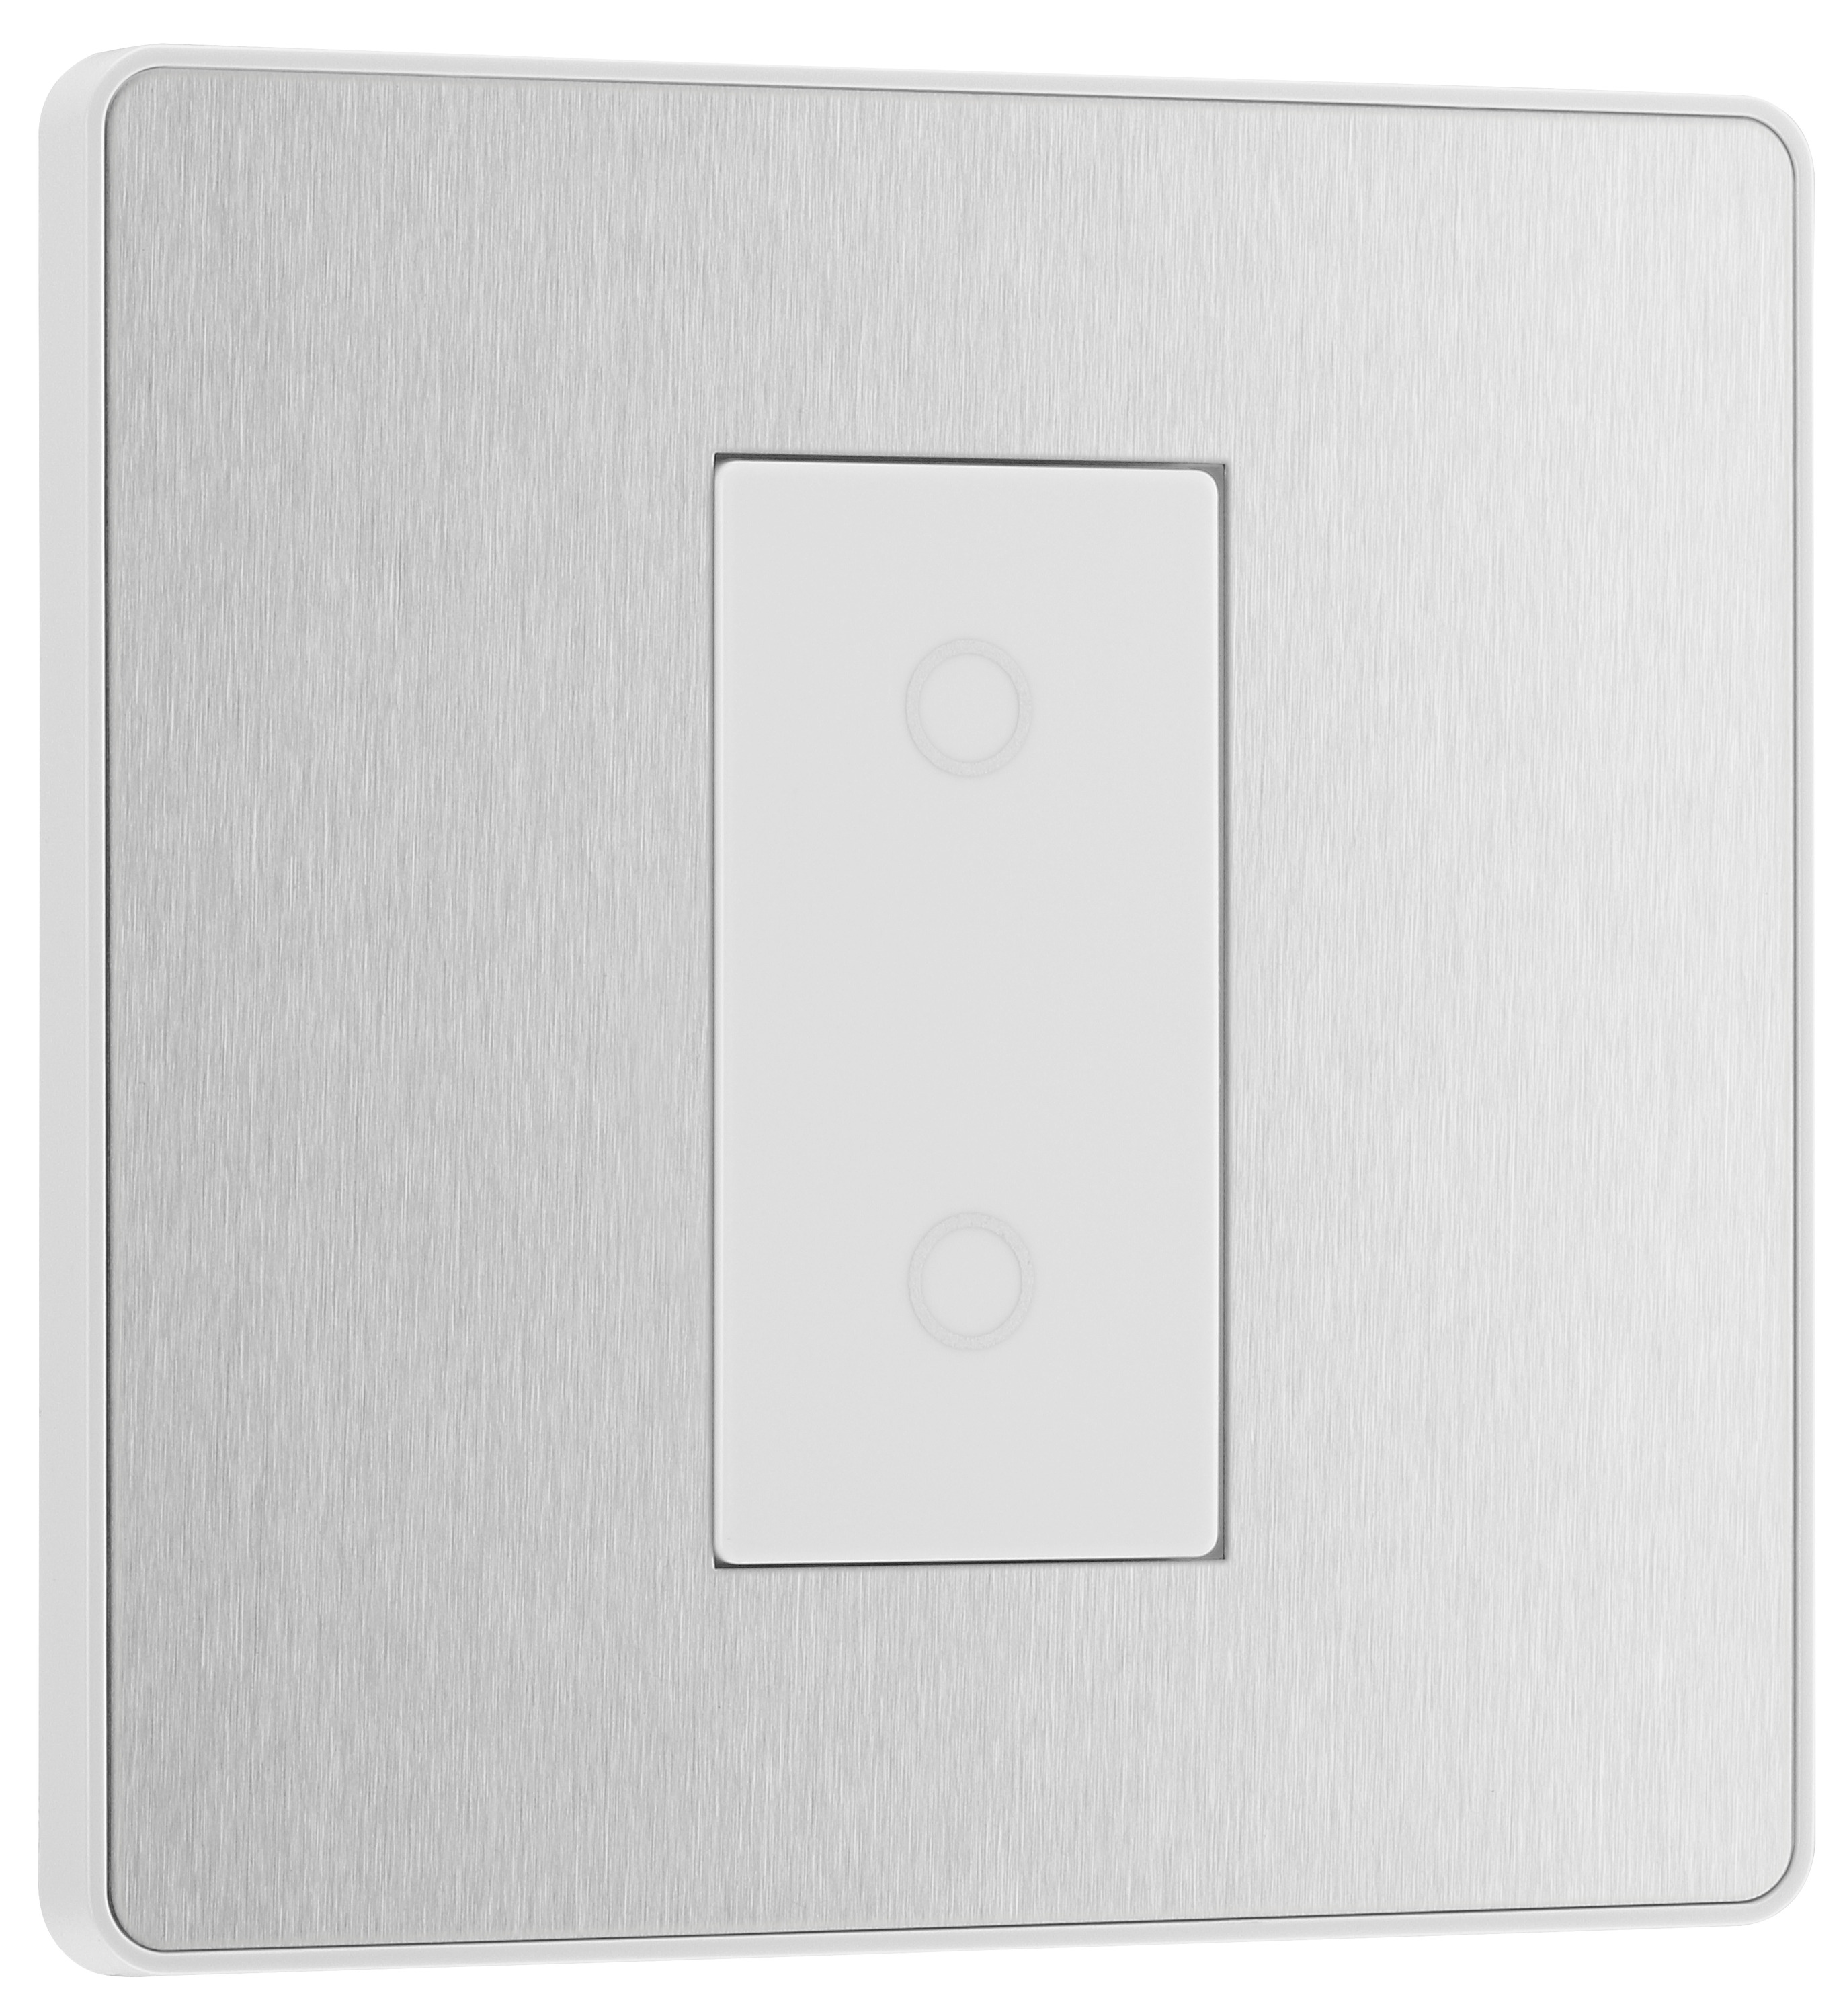 BG Evolve Brushed Steel 2 Way Master Single Touch Dimmer Switch - 200W